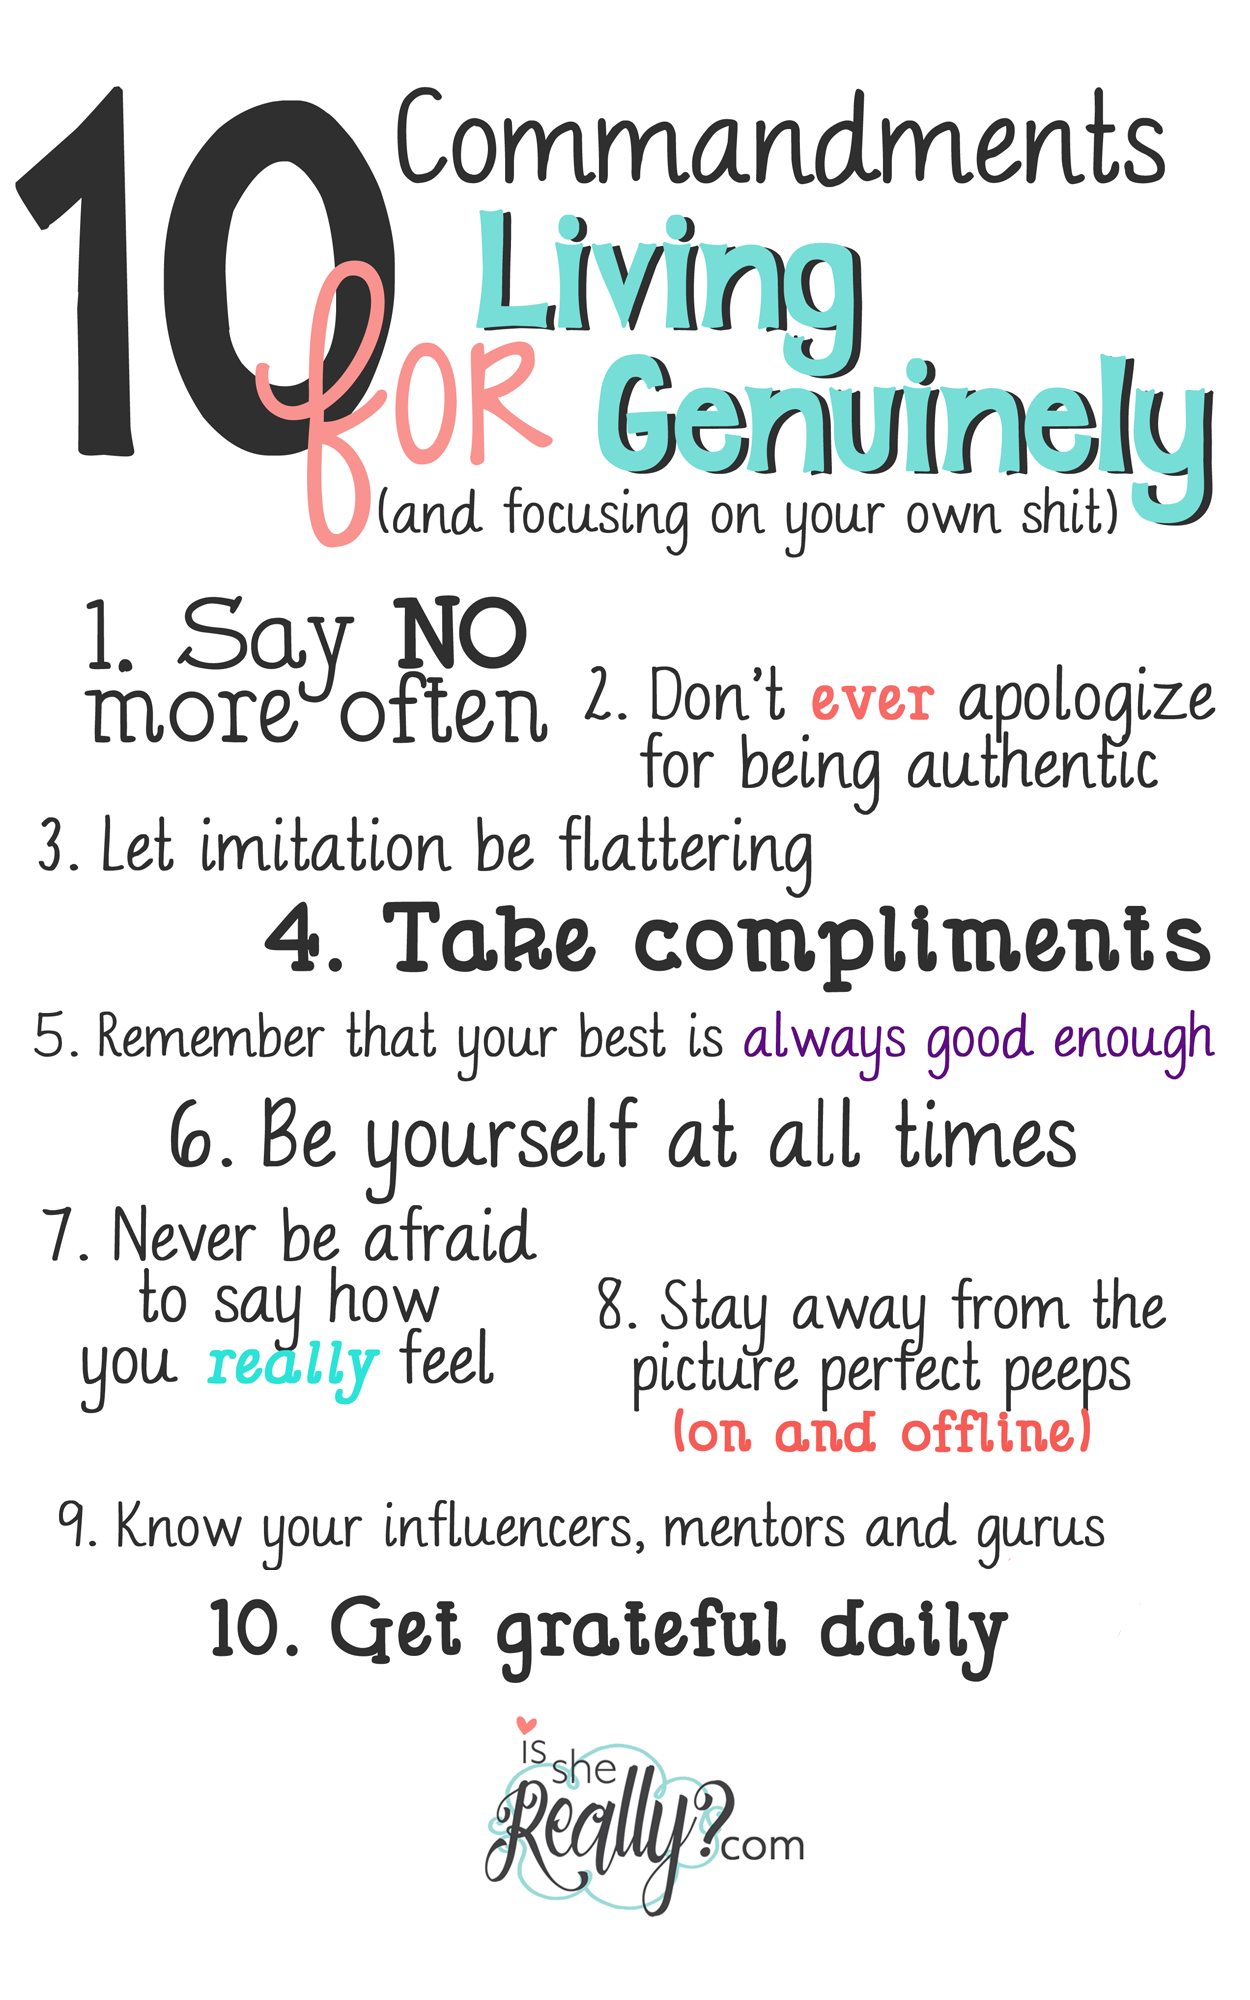 10 commandments for living genuinely #isshereally #livegenuinely @ginaekirk